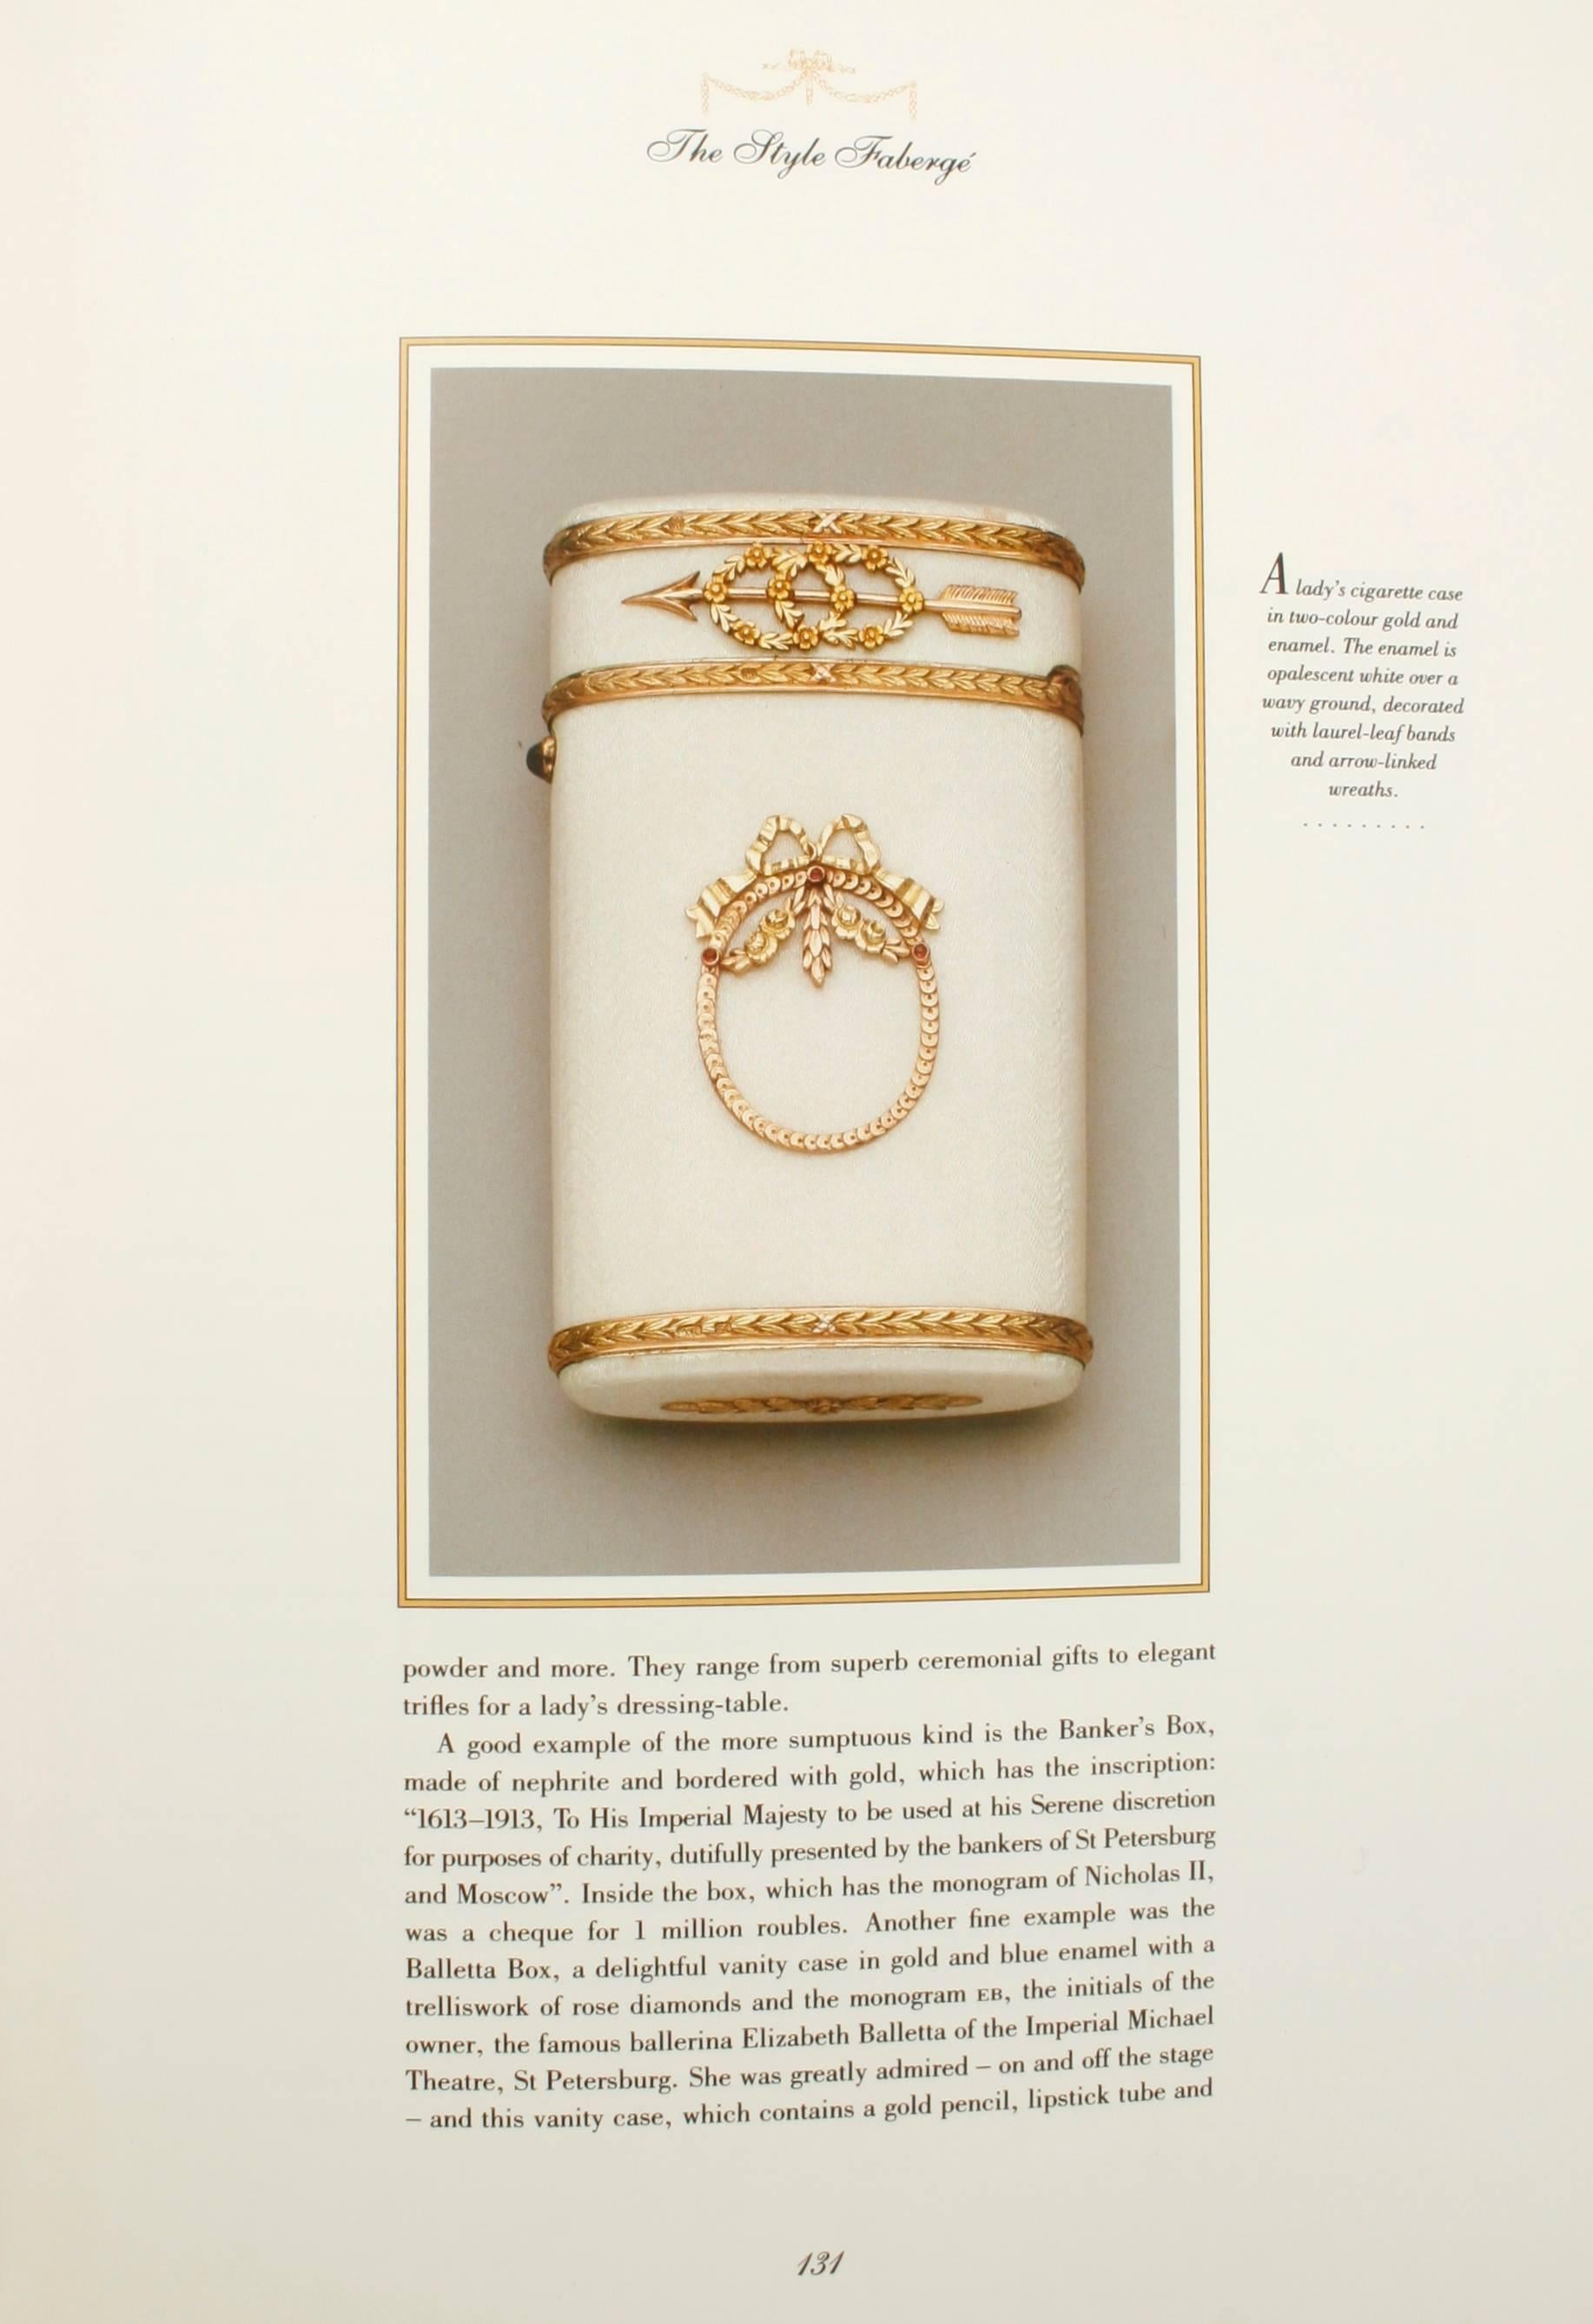 Paper Art of Fabergé by John Booth, First Edition